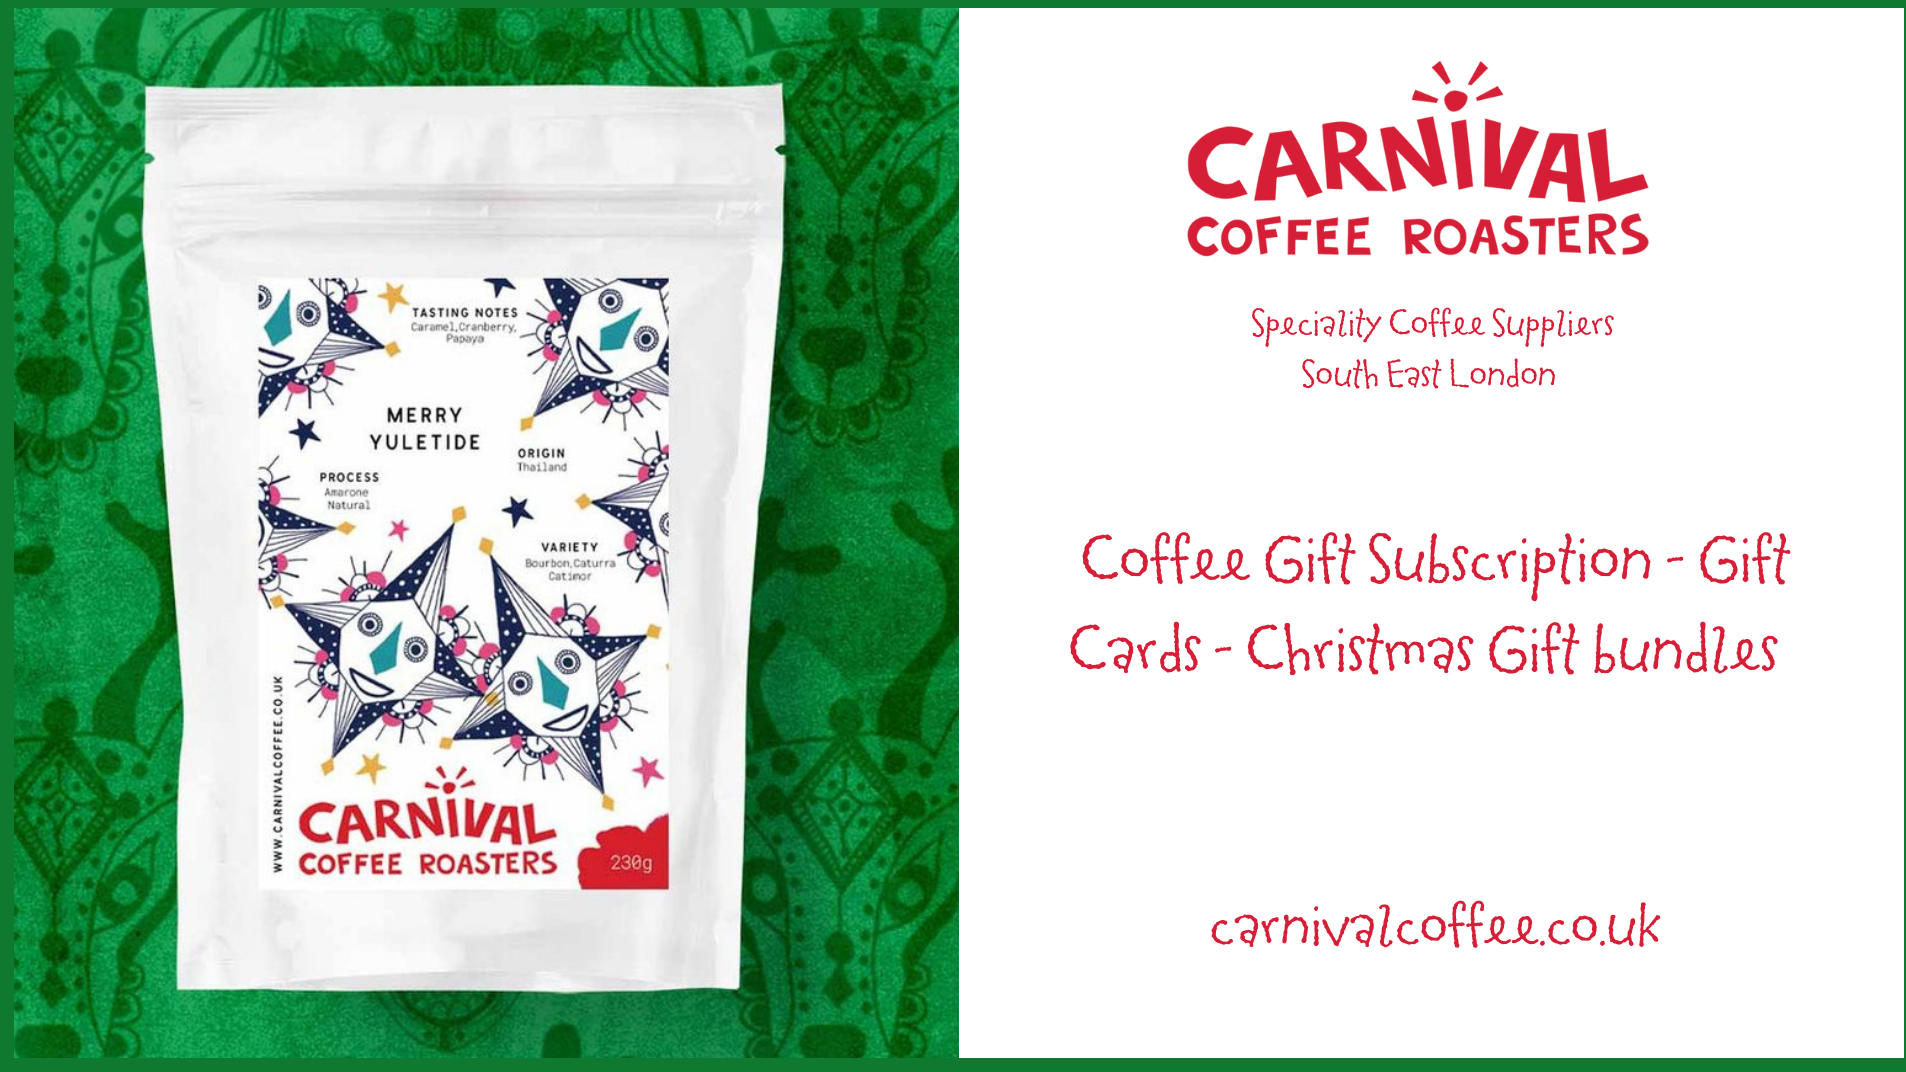 Top Coffee Roaster Near Lewisham Offers Organic Gift Subscriptions for Christmas